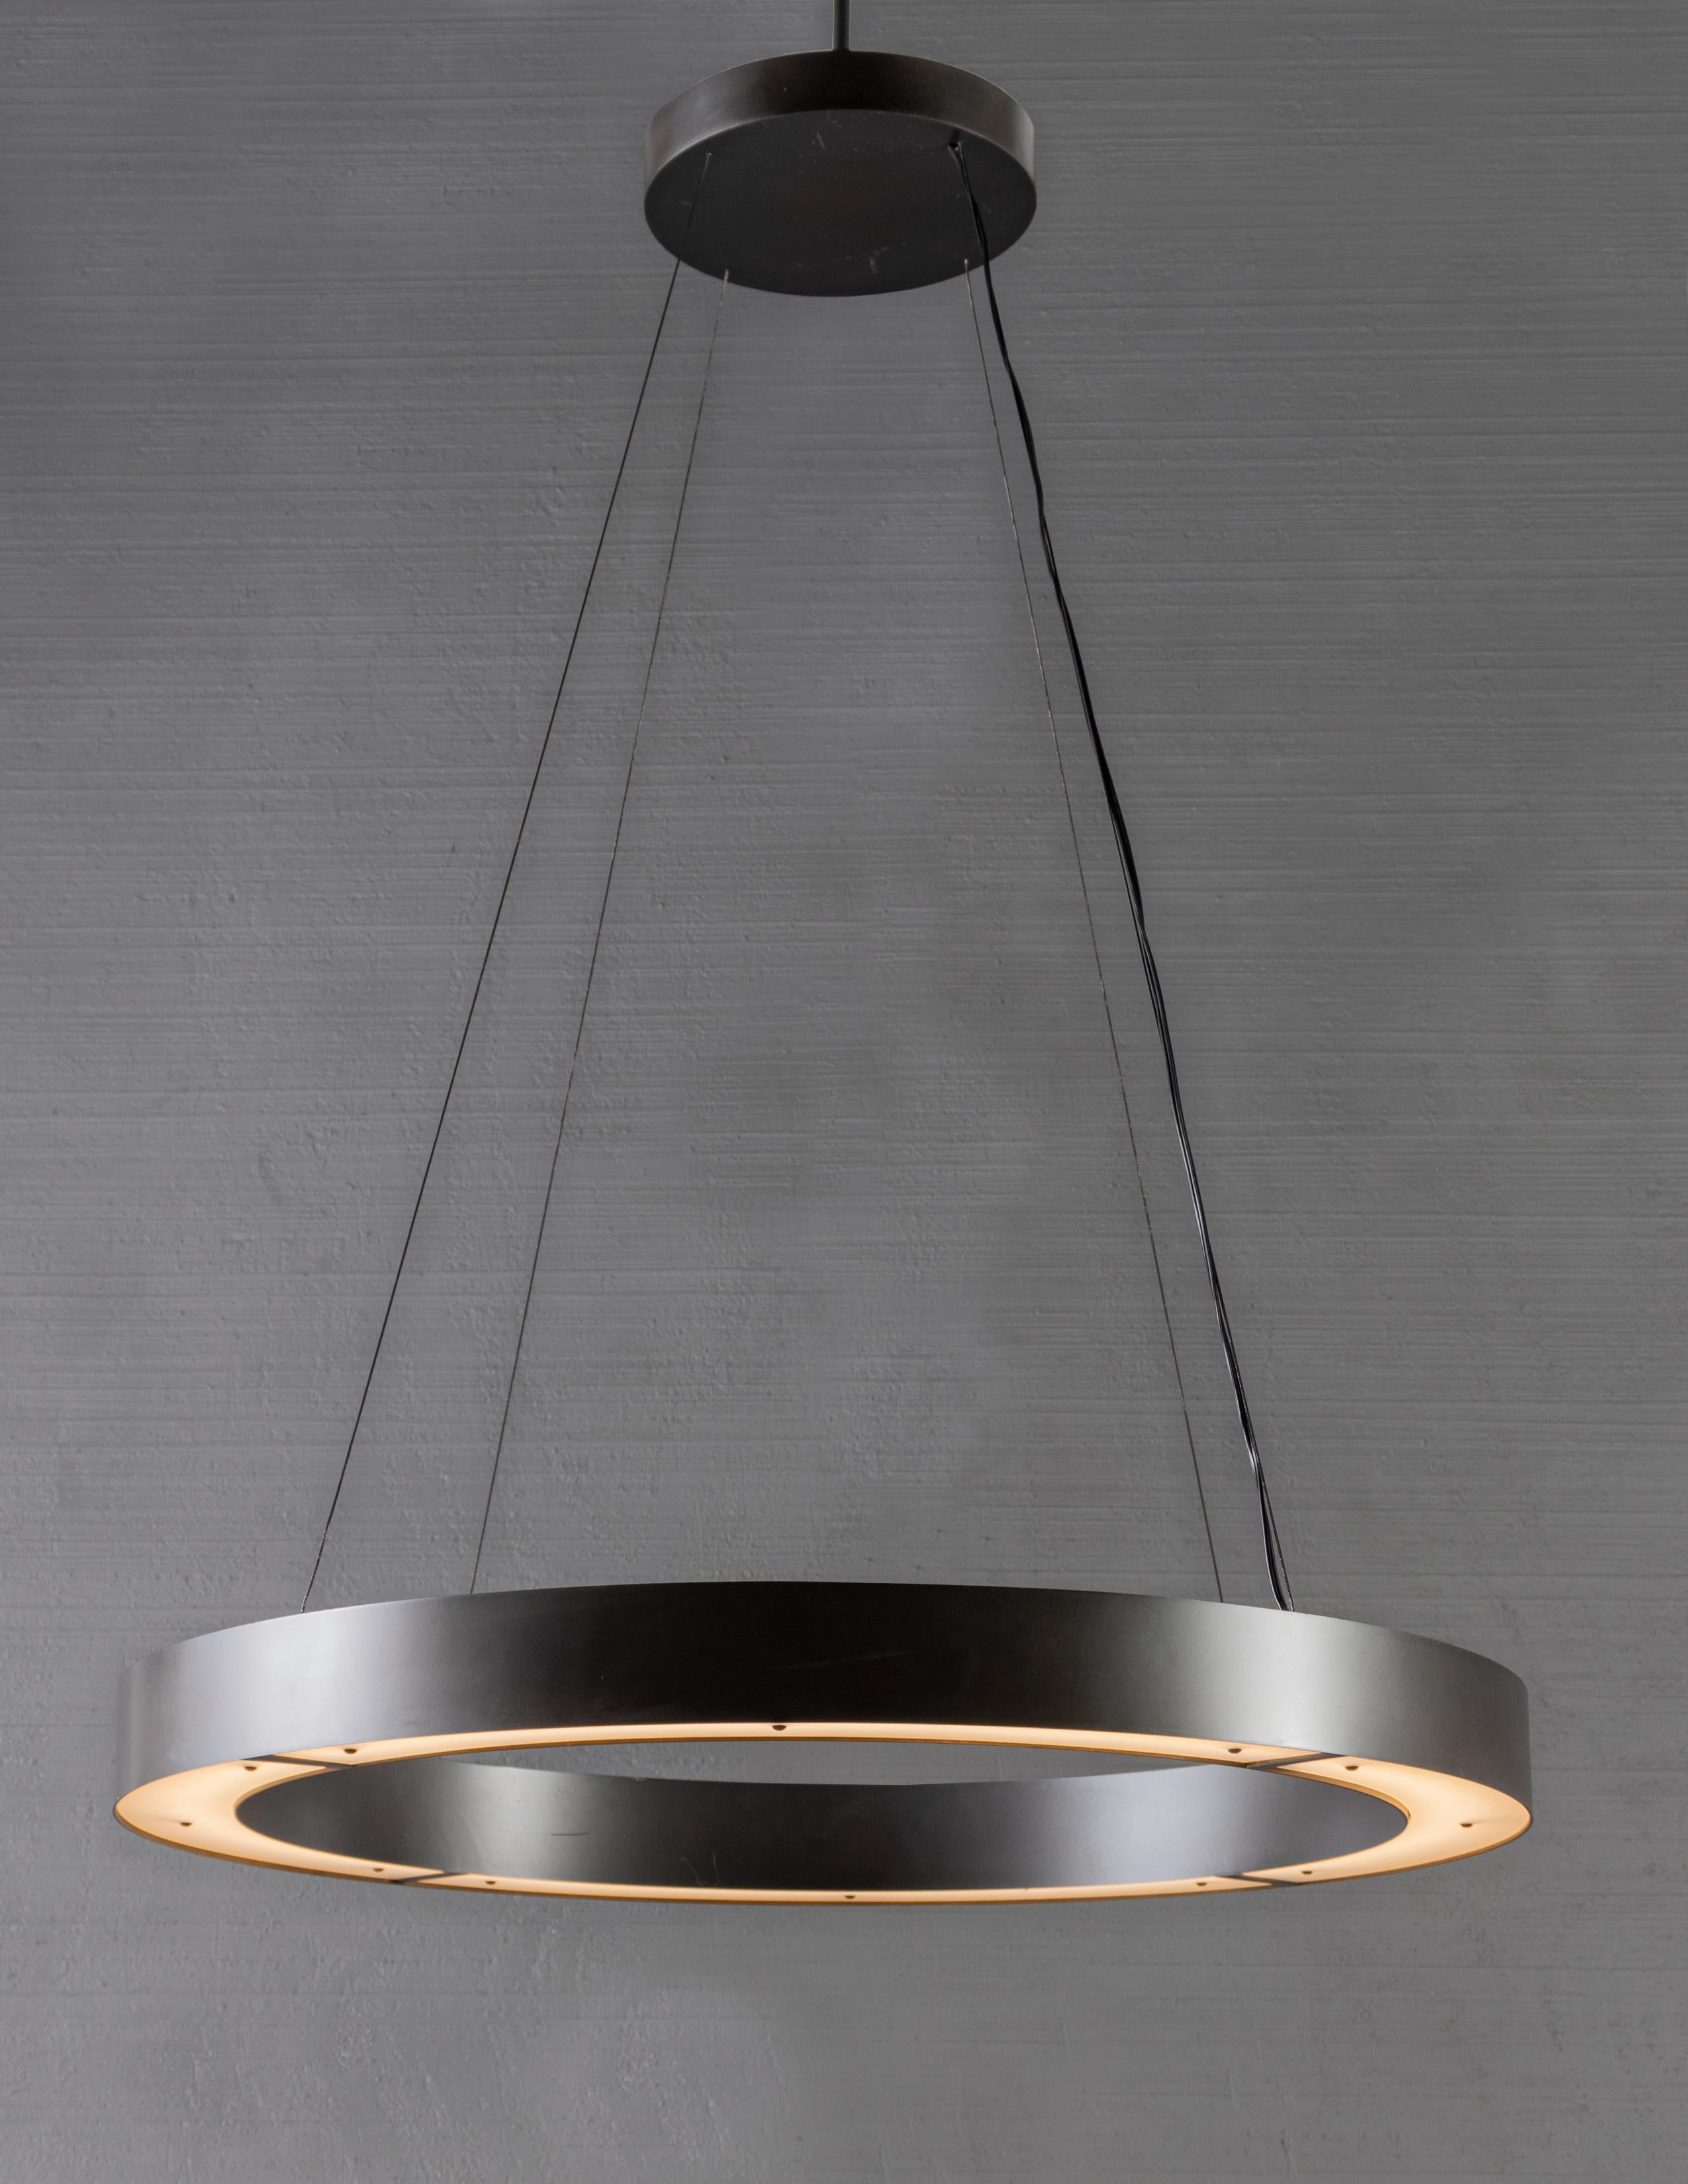 Modernist suspension ring light. Bulb LED continuous loop.

Bronze tone steel body with steel cable suspension. Height is adjustable.

Handcrafted in Italy. Sold exclusively at Brendan Bass.

Minimum hanging height: N/A
Maximum hanging height: